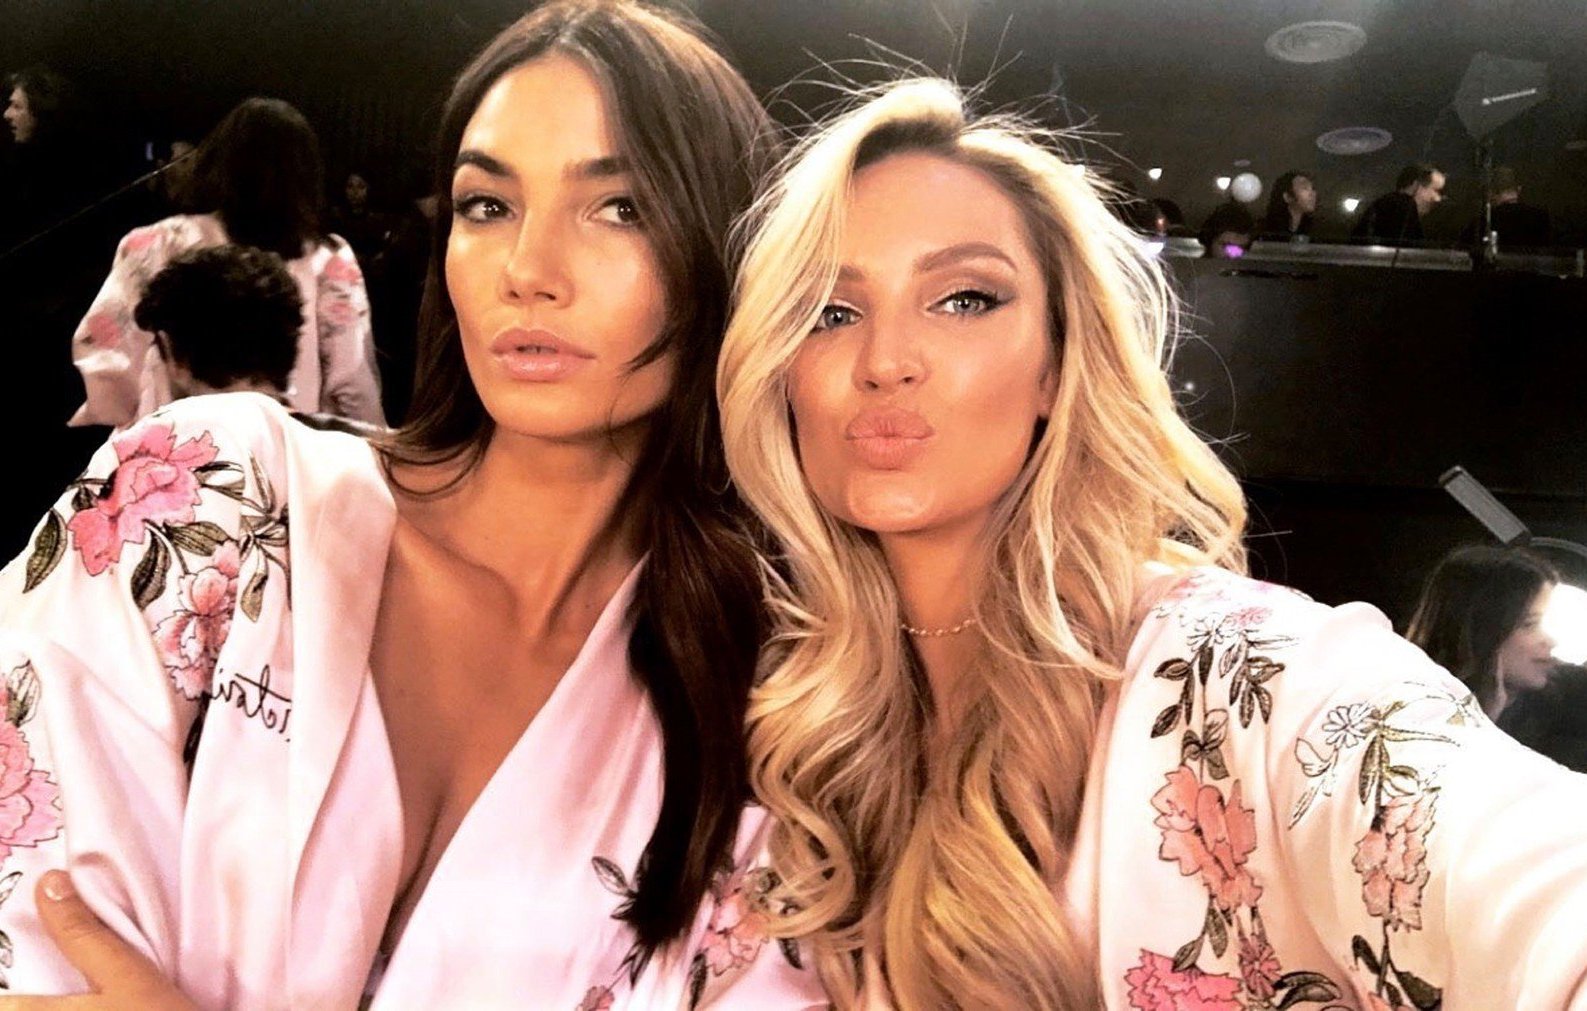 Various, UNITED KINGDOM - Celebrity social media photos! Pictured: Candice Swanepoel, Lily Dondalson BACKGRID UK 20 NOVEMBER 2017 *BACKGRID DOES NOT CLAIM ANY COPYRIGHT OR LICENSE IN THE ATTACHED MATERIAL. ANY DOWNLOADING FEES CHARGED BY BACKGRID ARE FOR BACKGRID'S SERVICES ONLY, AND DO NOT, NOR ARE THEY INTENDED TO, CONVEY TO THE USER ANY COPYRIGHT OR LICENSE IN THE MATERIAL. BY PUBLISHING THIS MATERIAL , THE USER EXPRESSLY AGREES TO INDEMNIFY AND TO HOLD BACKGRID HARMLESS FROM ANY CLAIMS, DEMANDS, OR CAUSES OF ACTION ARISING OUT OF OR CONNECTED IN ANY WAY WITH USER'S PUBLICATION OF THE MATERIAL* UK: +44 208 344 2007 / uksales@backgrid.com USA: +1 310 798 9111 / usasales@backgrid.com *UK Clients - Pictures Containing Children Please Pixelate Face Prior To Publication*, Image: 355860992, License: Rights-managed, Restrictions: , Model Release: no, Credit line: Profimedia, Xposurephotos